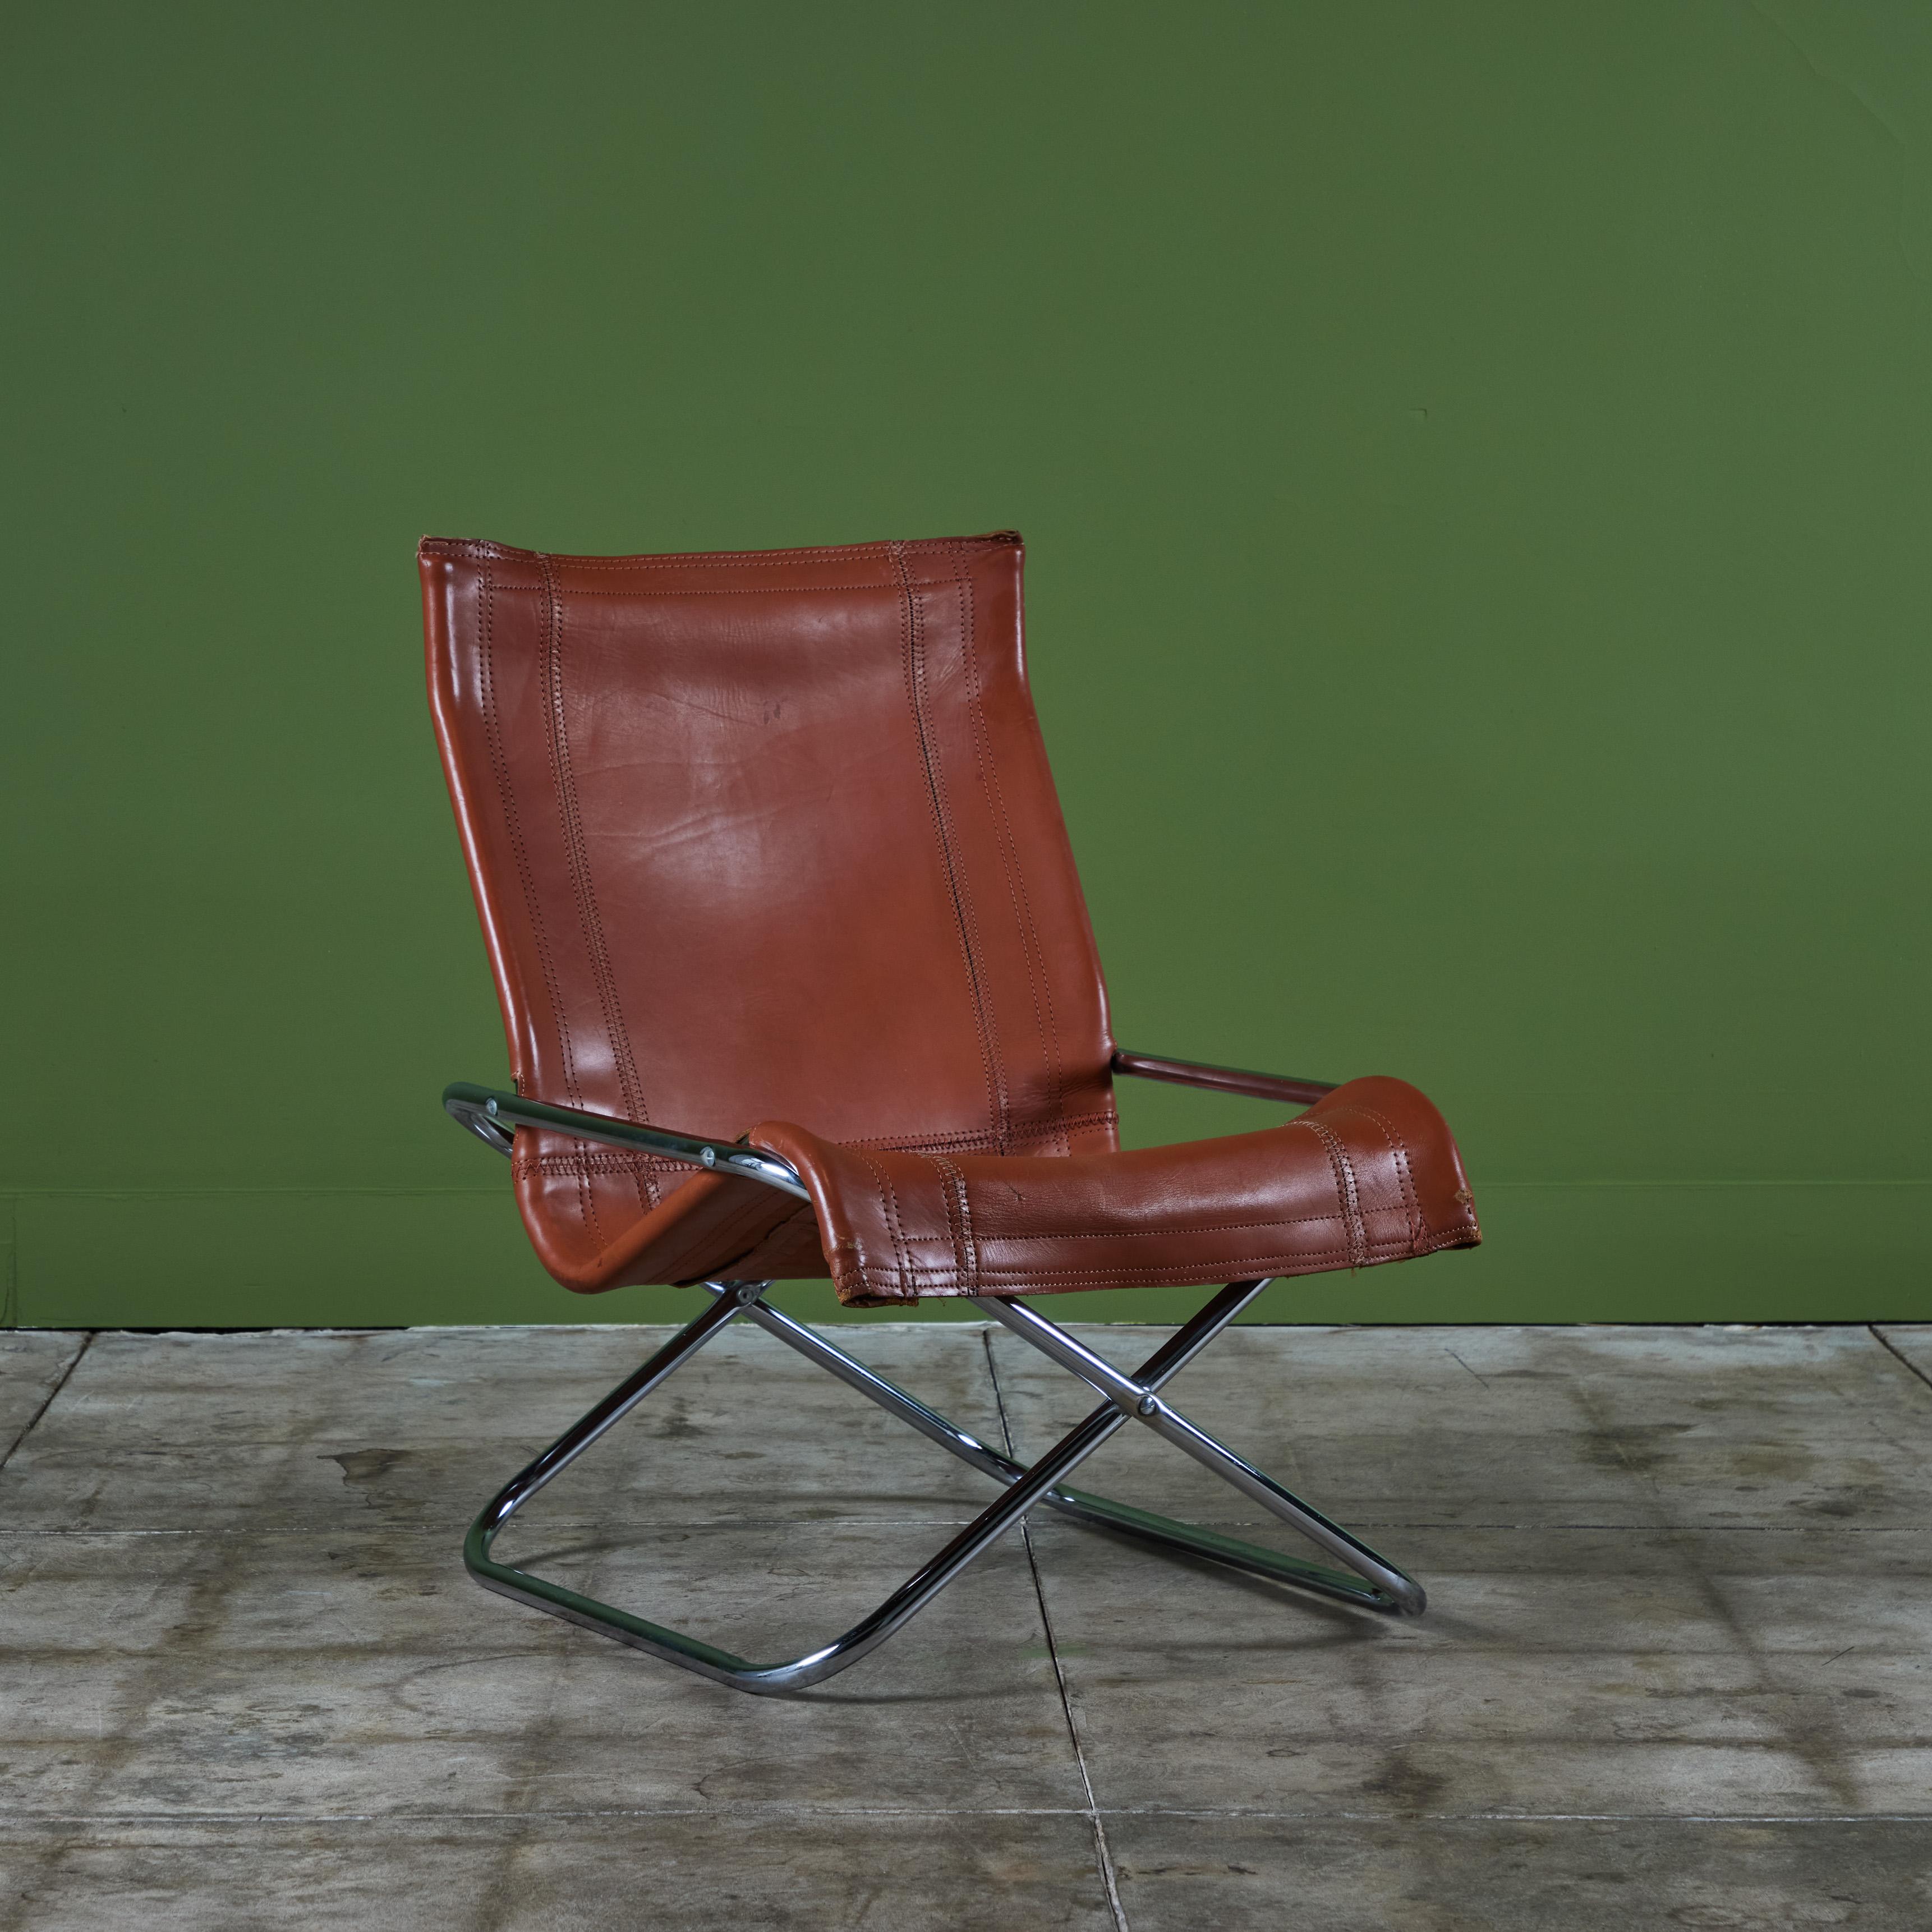 Takeshi Nii 'NY' Japanese Leather Folding Chair In Excellent Condition For Sale In Los Angeles, CA